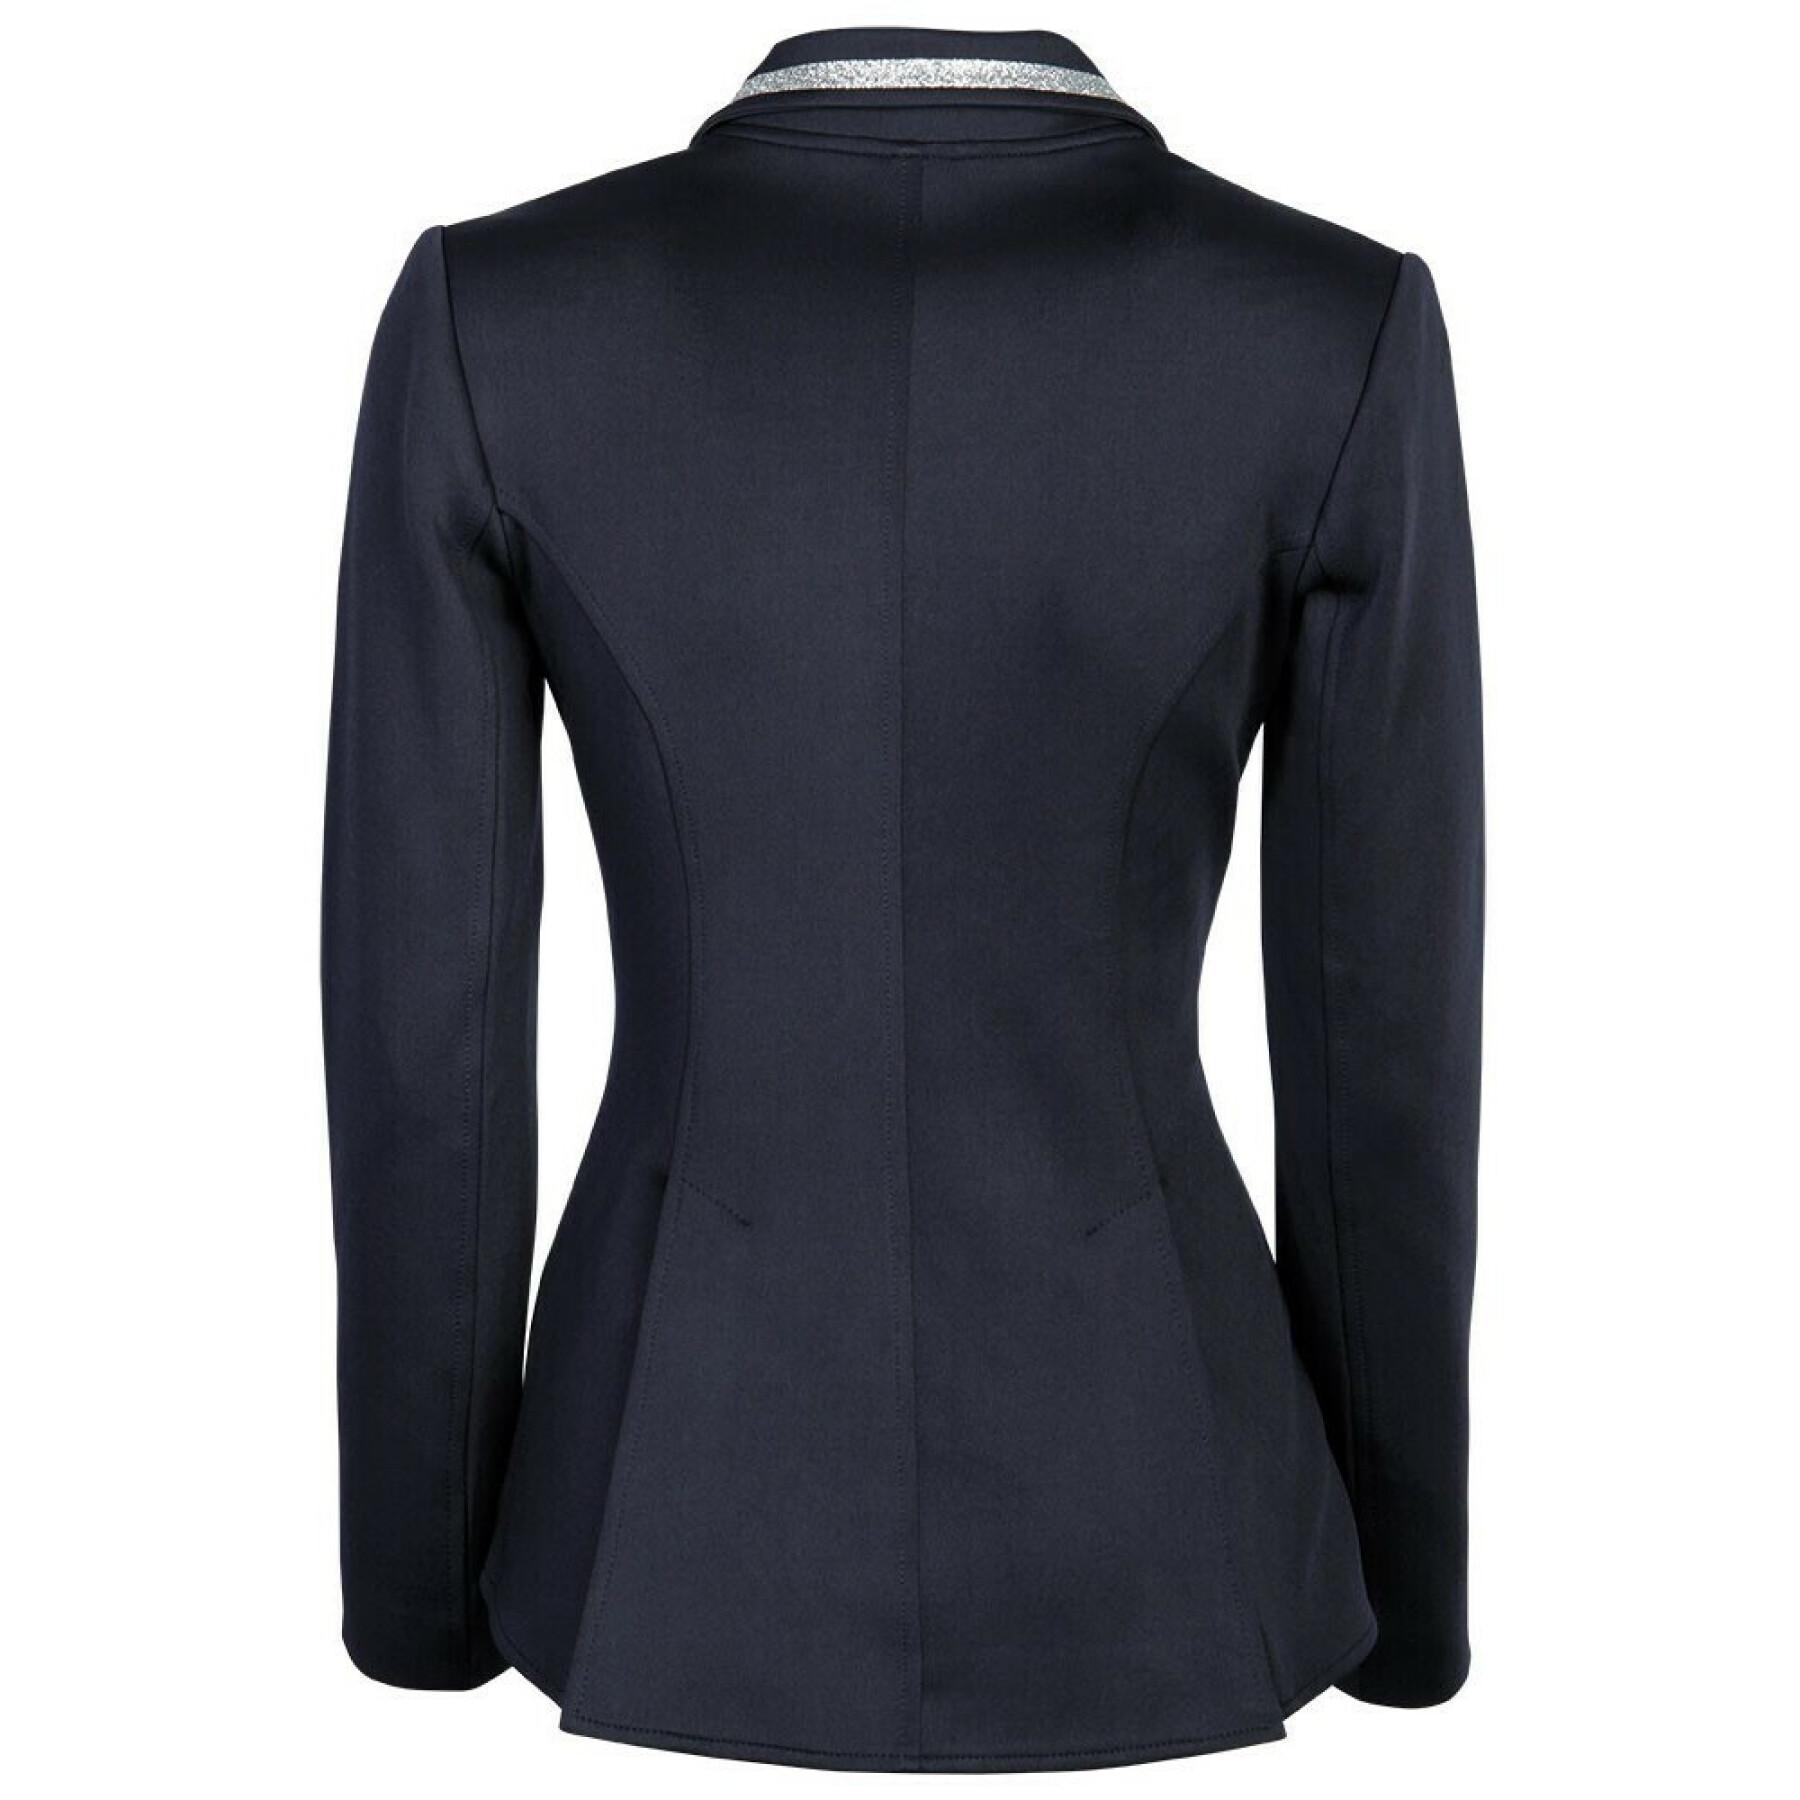 Women's competition jacket Harry's Horse Valence